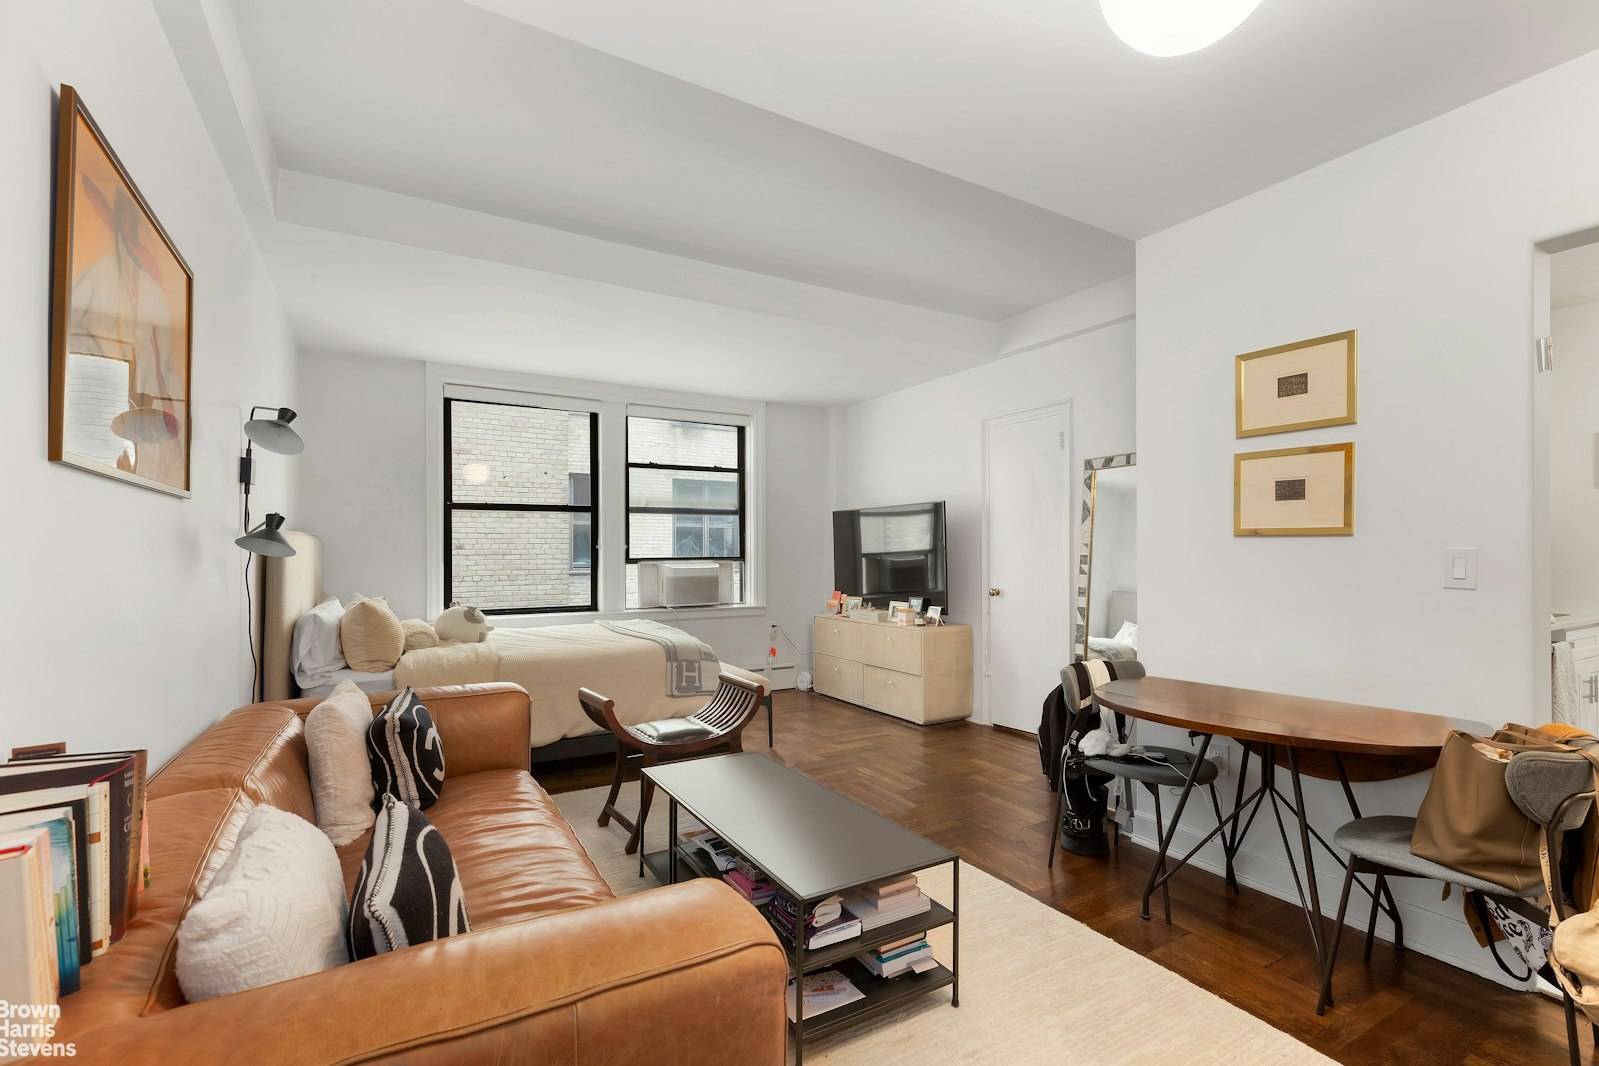 Live on Central Parks doorstep in this gut renovated, mint, studio apartment located at the famed Franconia.